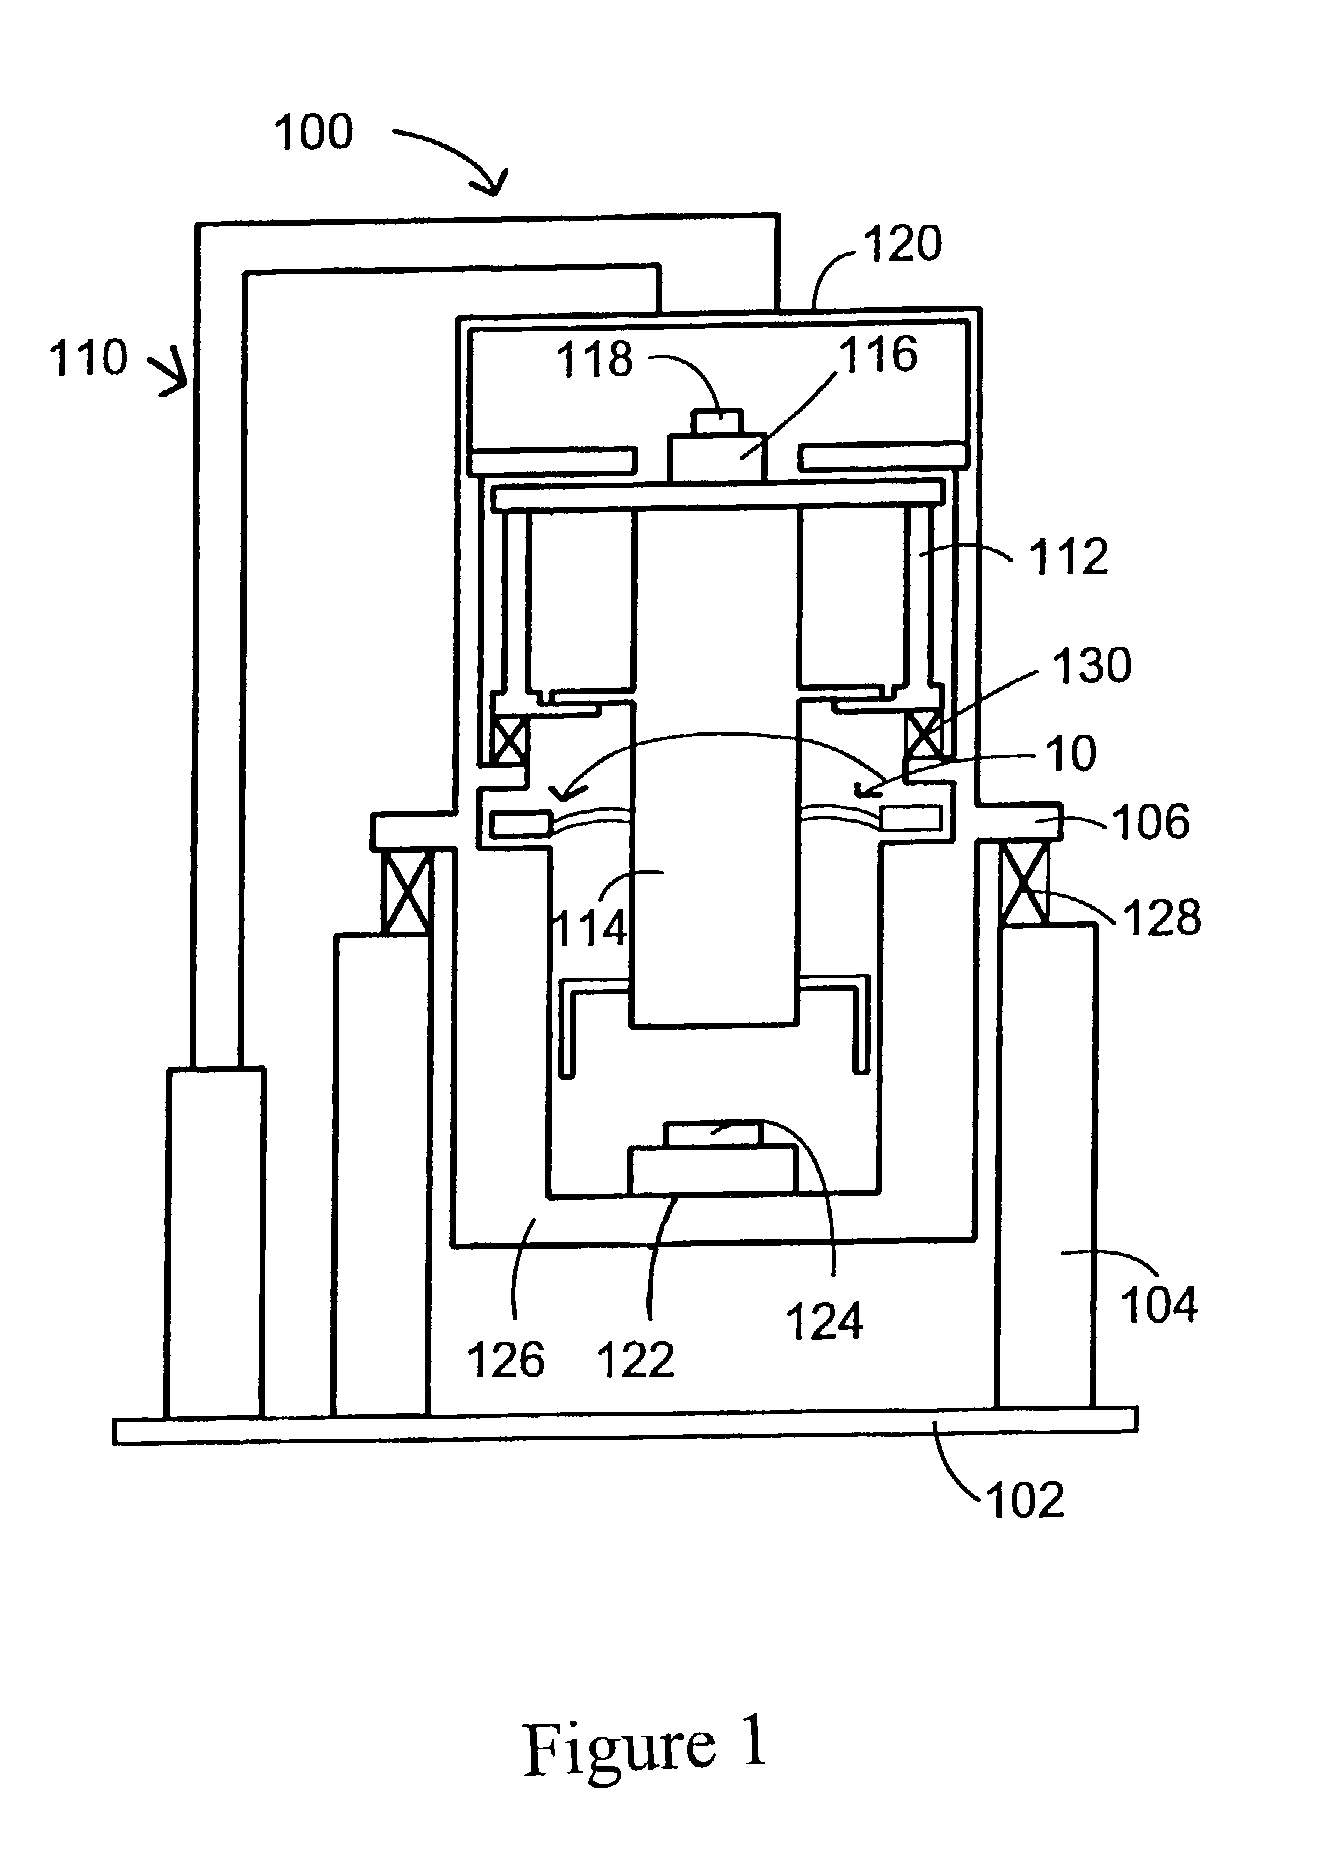 Methods and apparatus for initializing a planar motor